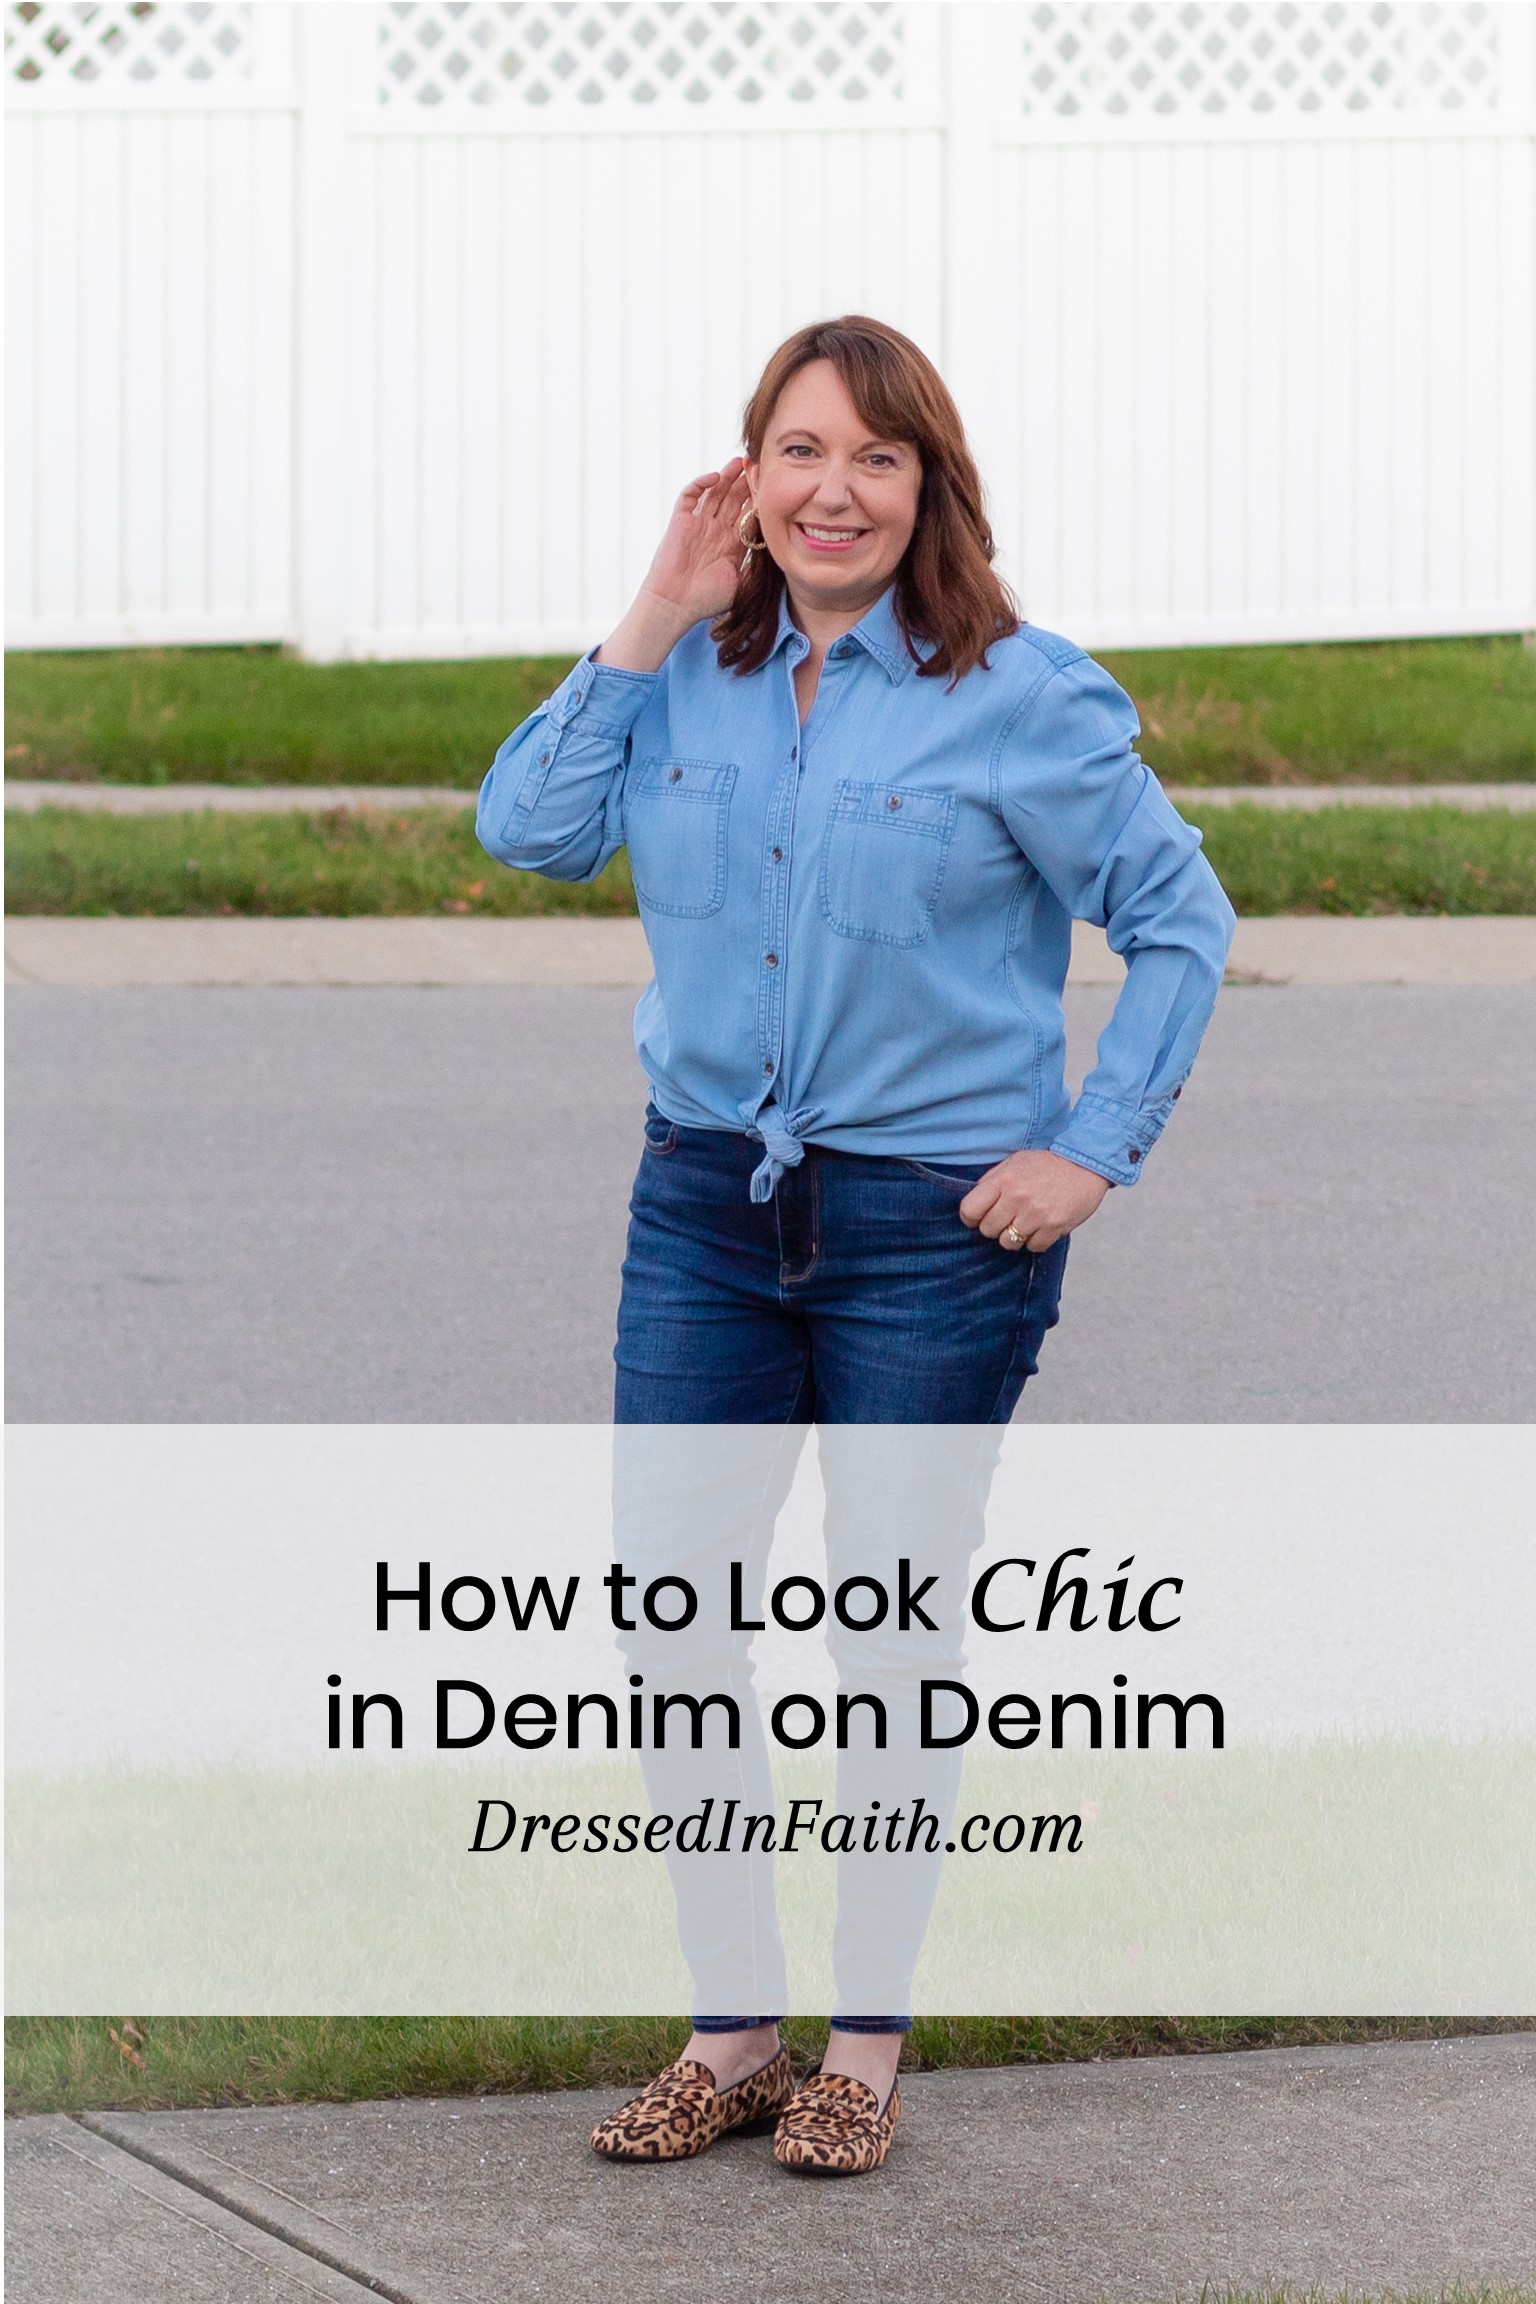 How to Look Chic in Denim on Denim – Dressed in Faith